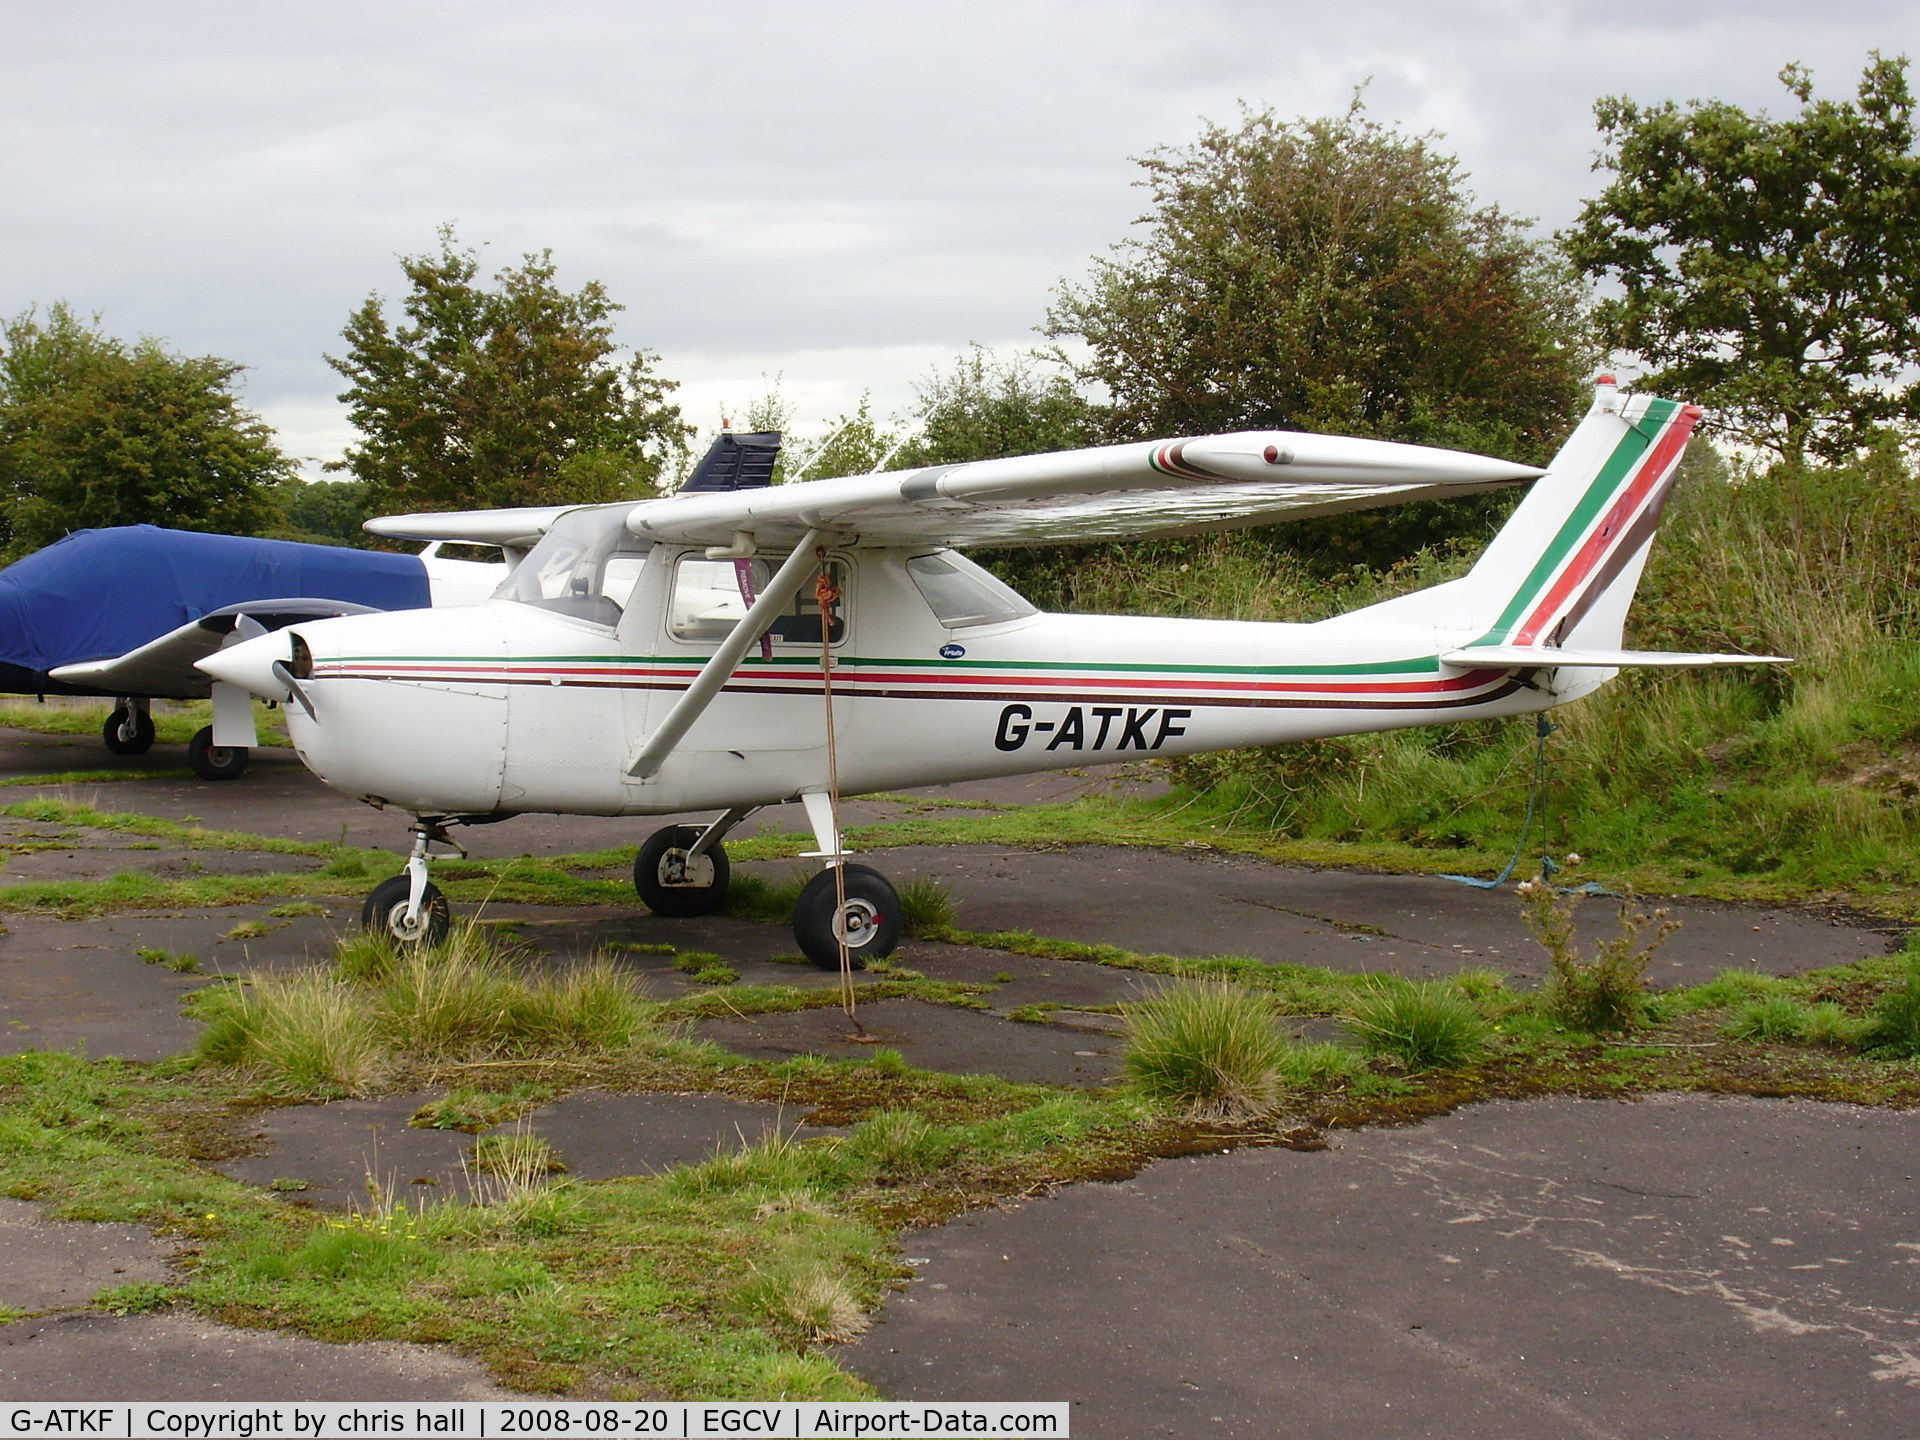 G-ATKF, 1965 Cessna 150F C/N 150-62386, Sleap Airfield